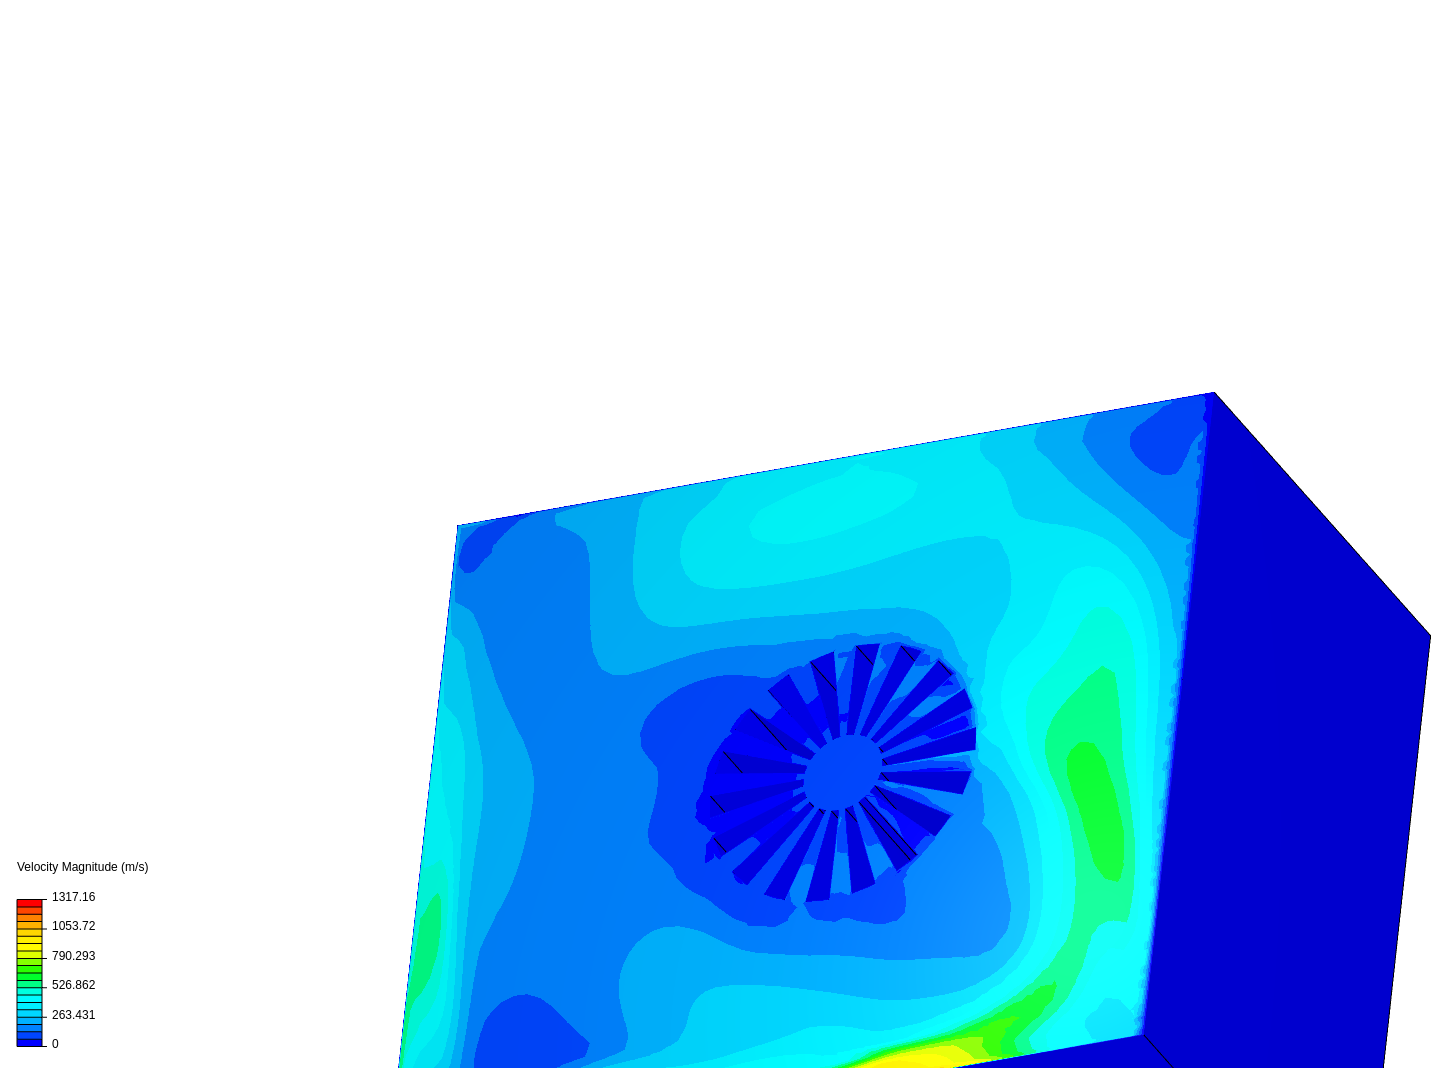 diffuser design with boundary conditions adapted image